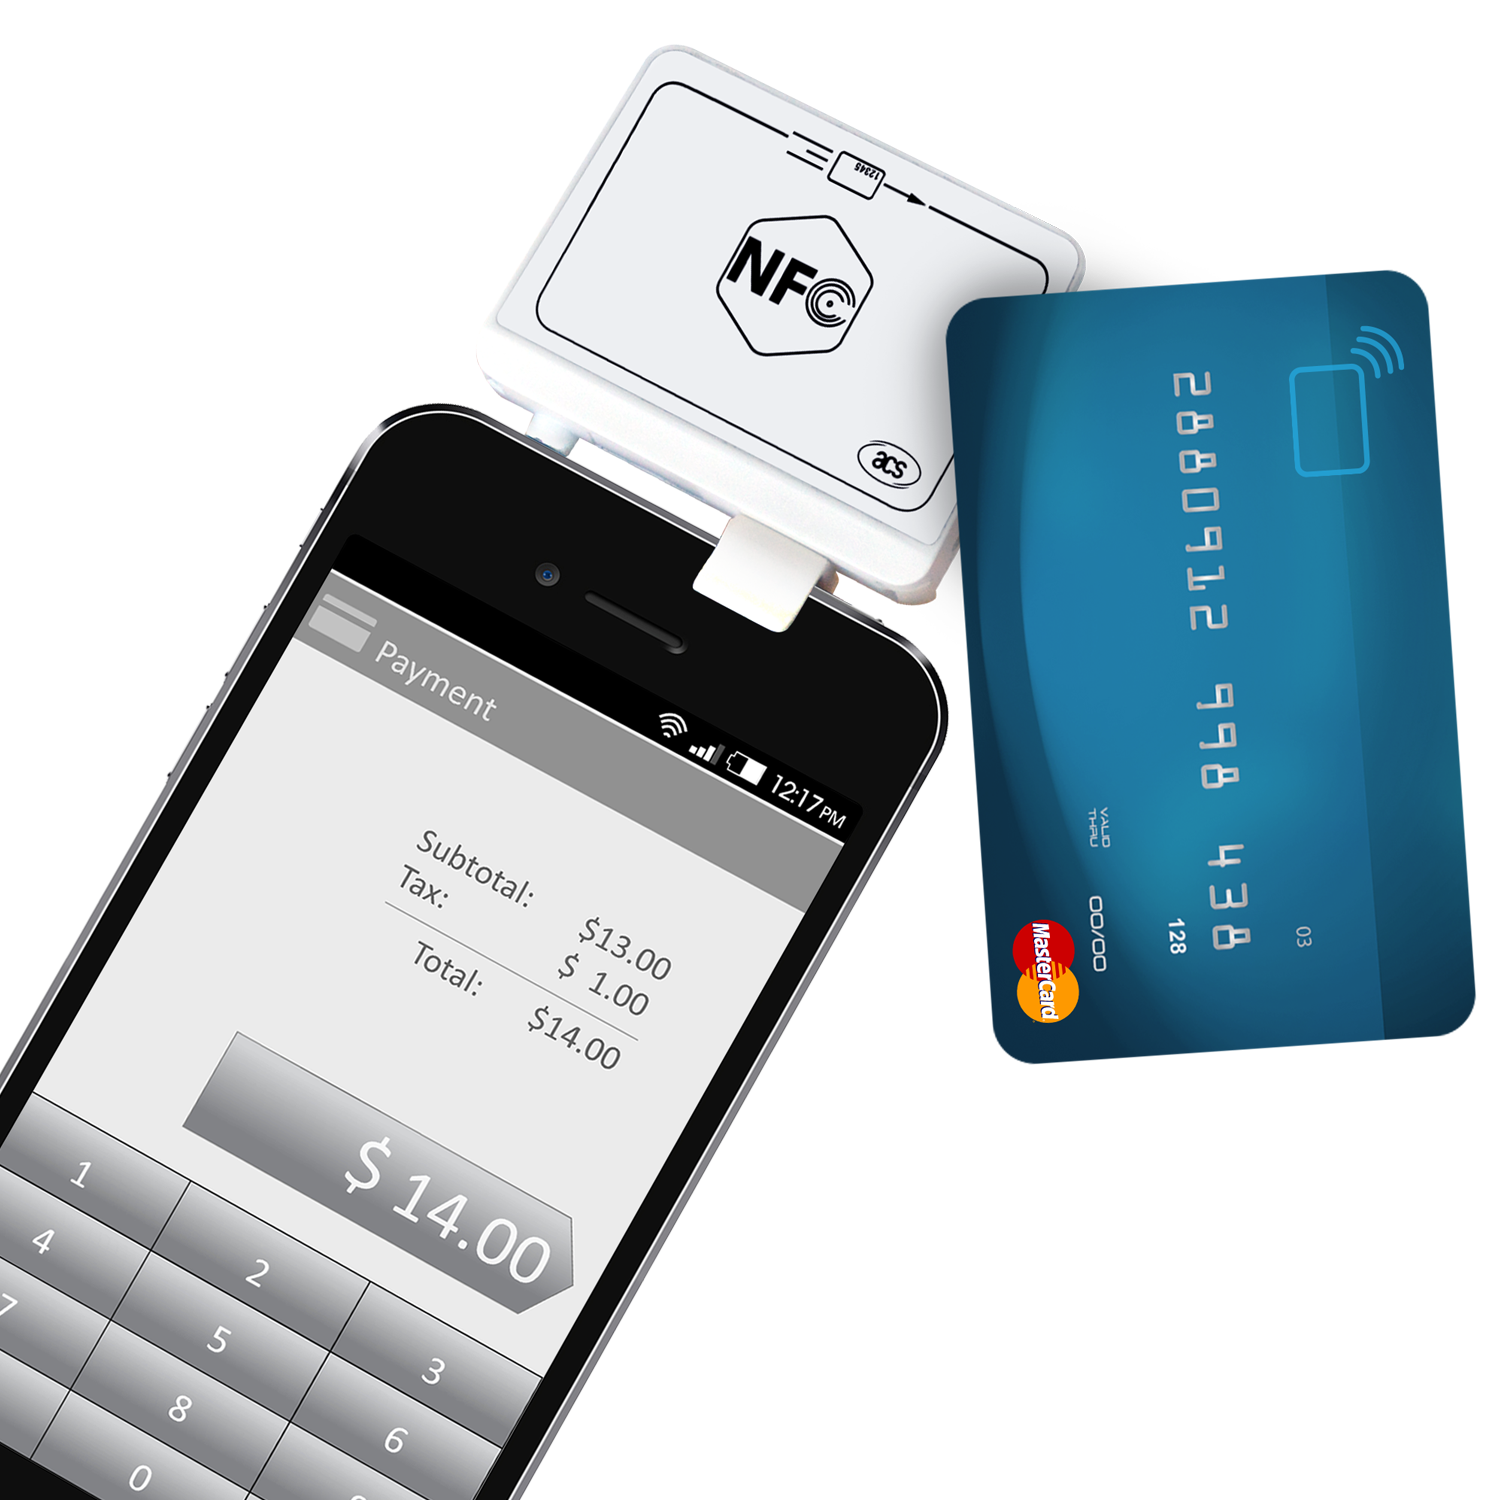 nfc tag reader android